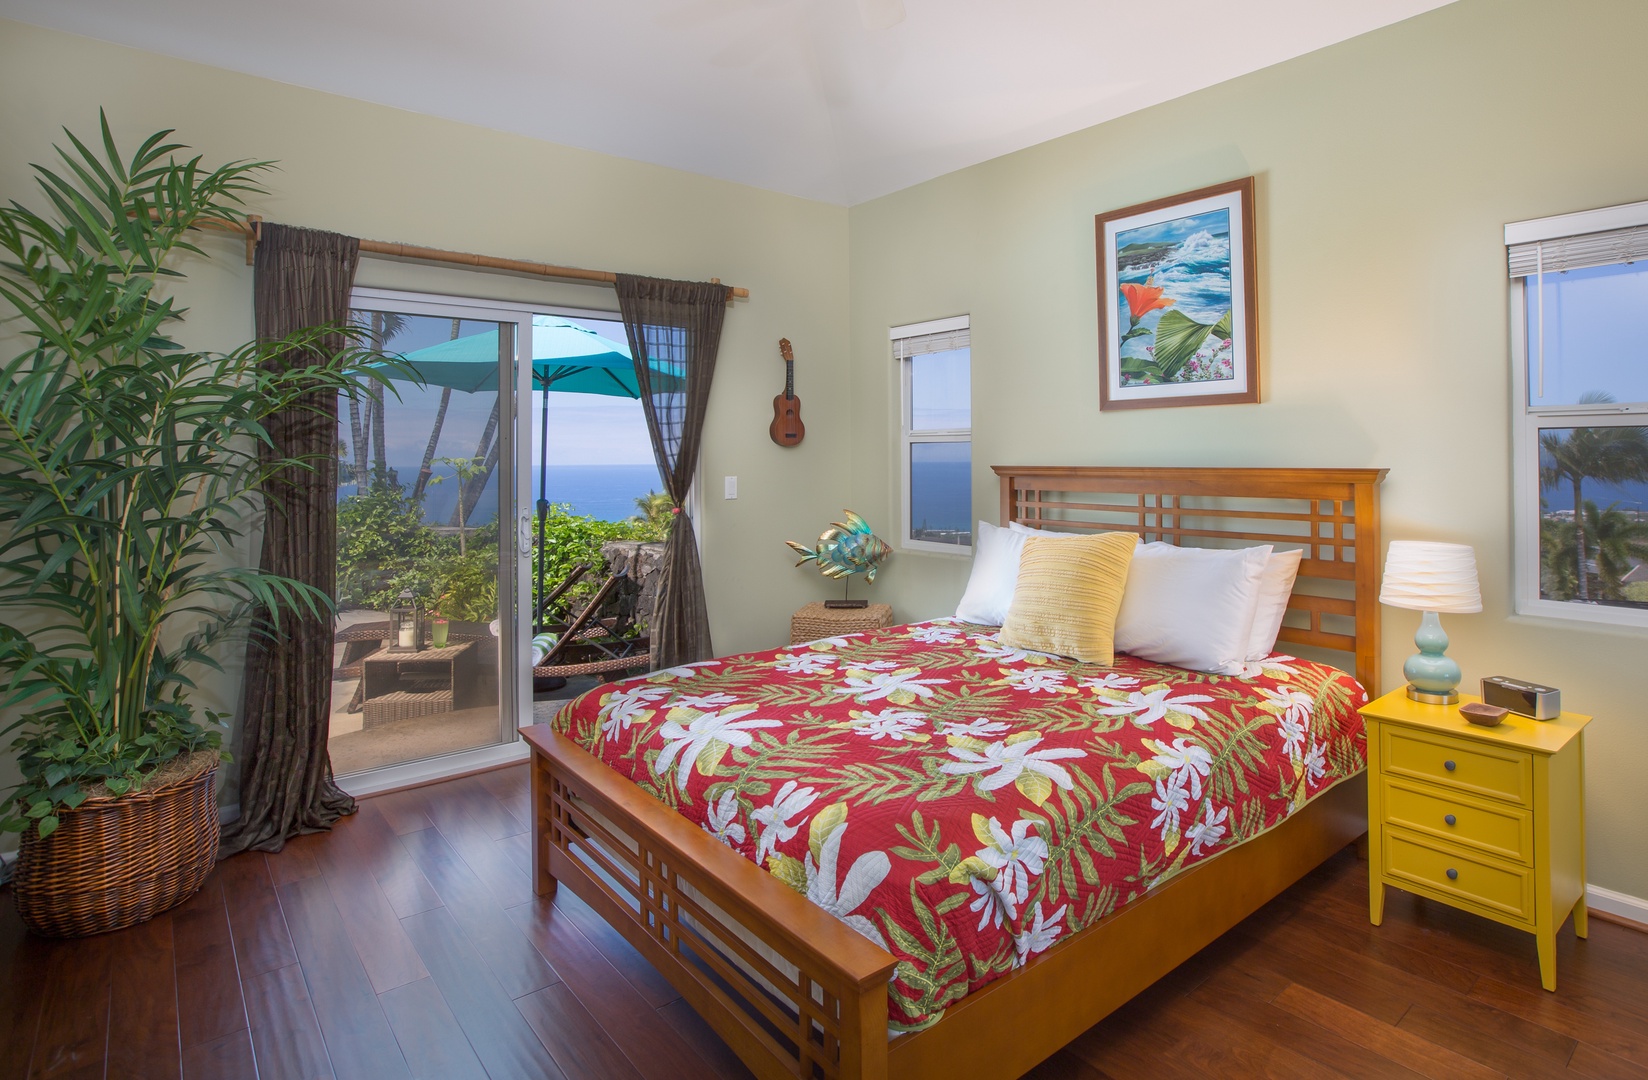 Kailua Kona Vacation Rentals, 7 C's Kona (Big Island) - Second bedroom, with access out of glass sliders onto back lanai by the pool.